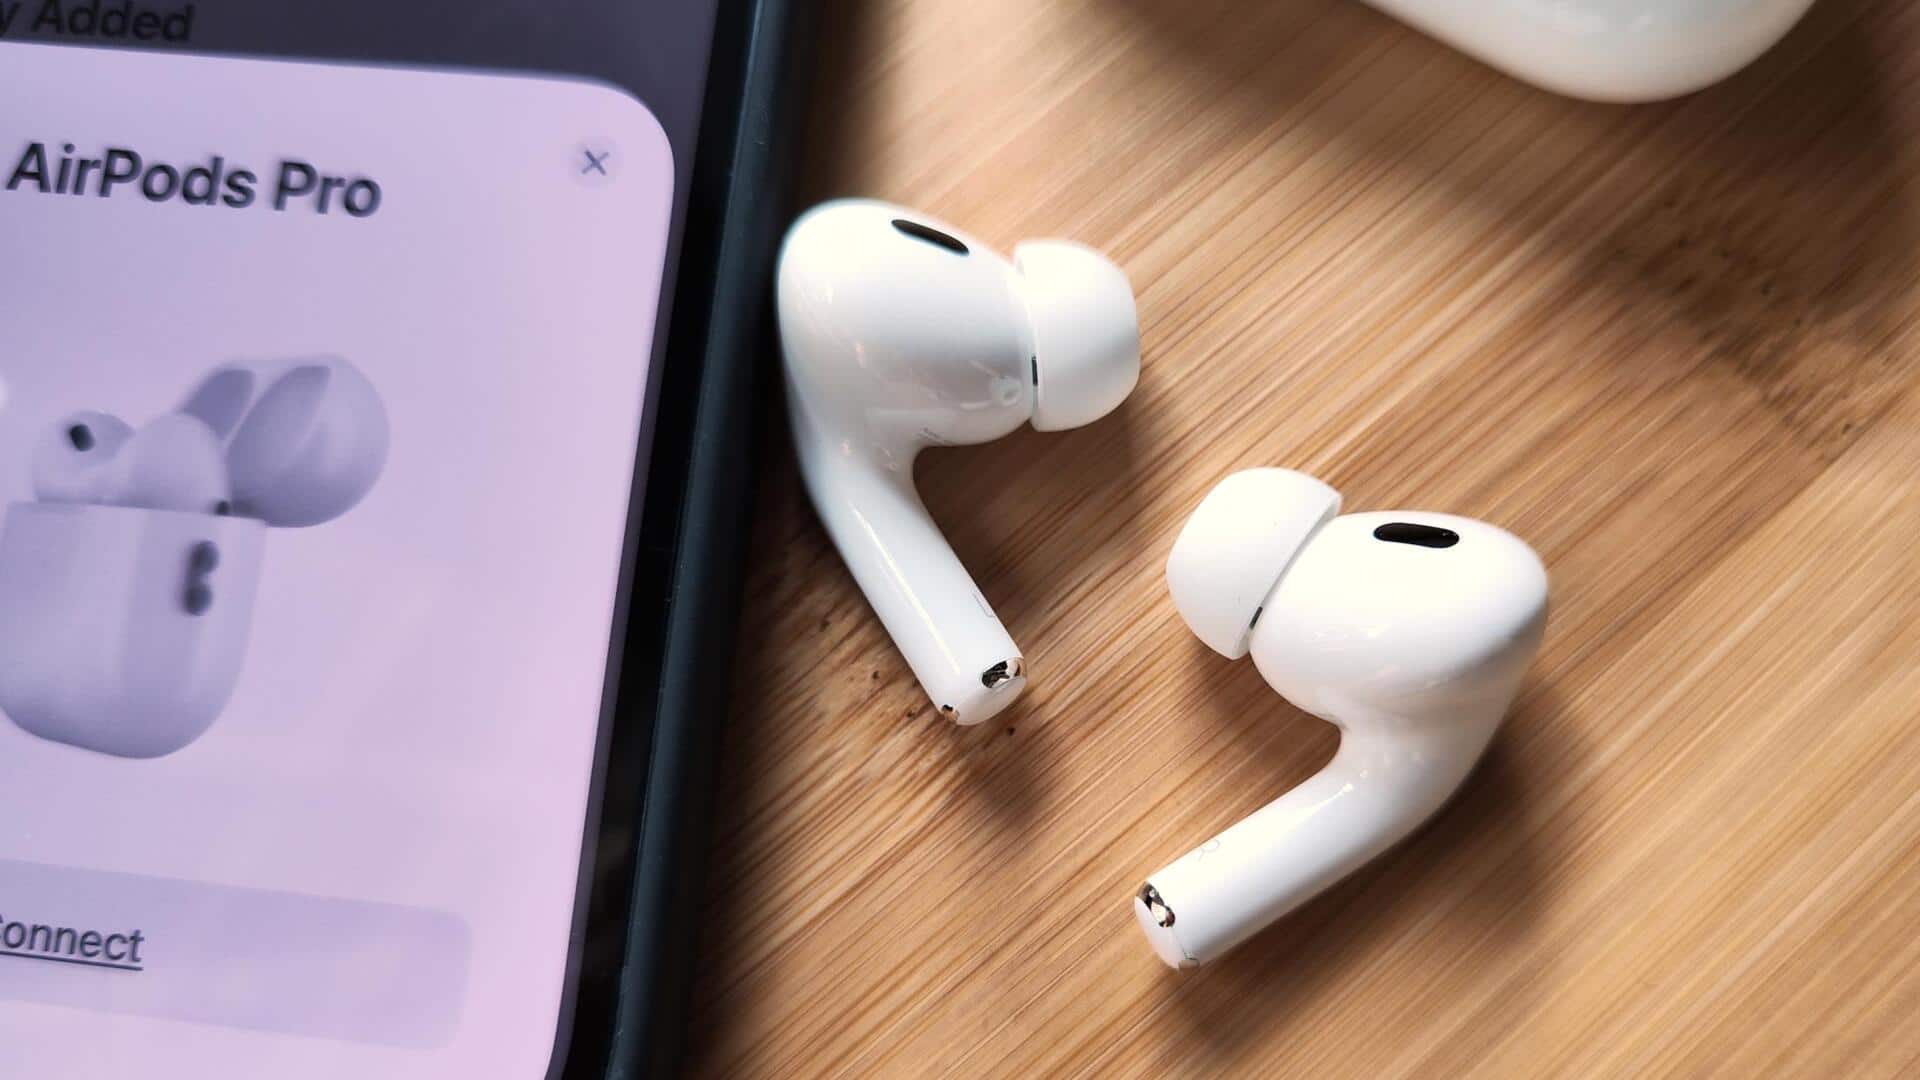 Apple is working on camera-integrated AirPods for improved spatial experiences